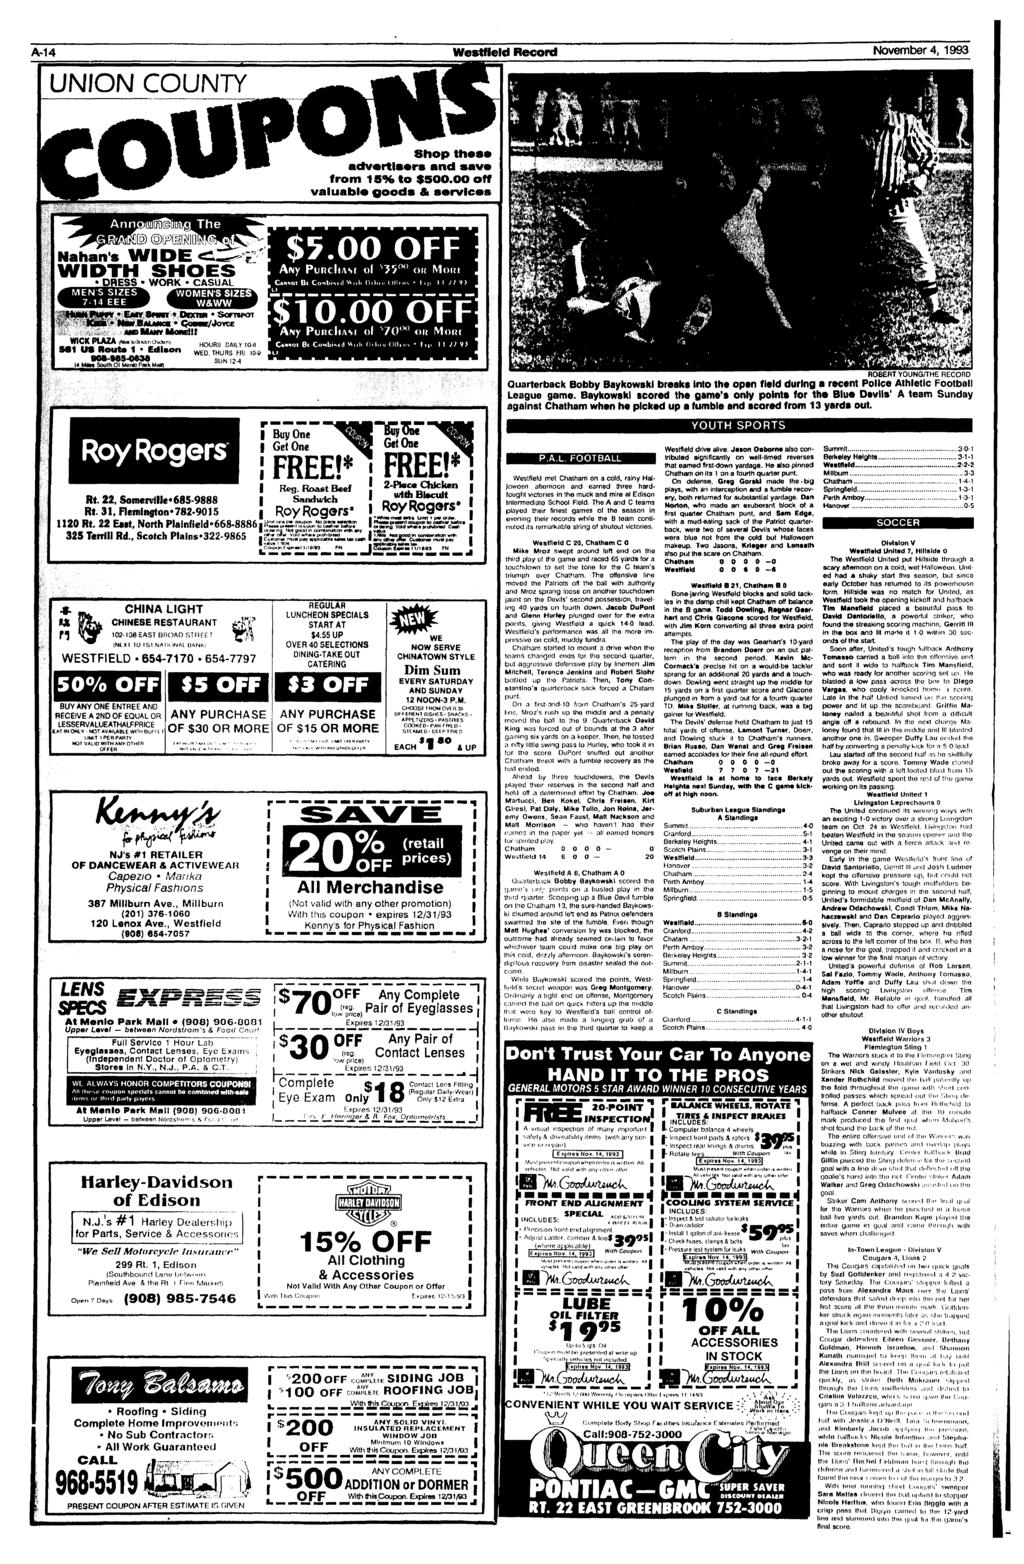 A-14 Westfleld Record November 4, 1993 UNION COUNTY Shop thest) advertisers and save from 15% to $500.00 off valuable goods & services Nahan's WIDE WIDTH SHOES $5.